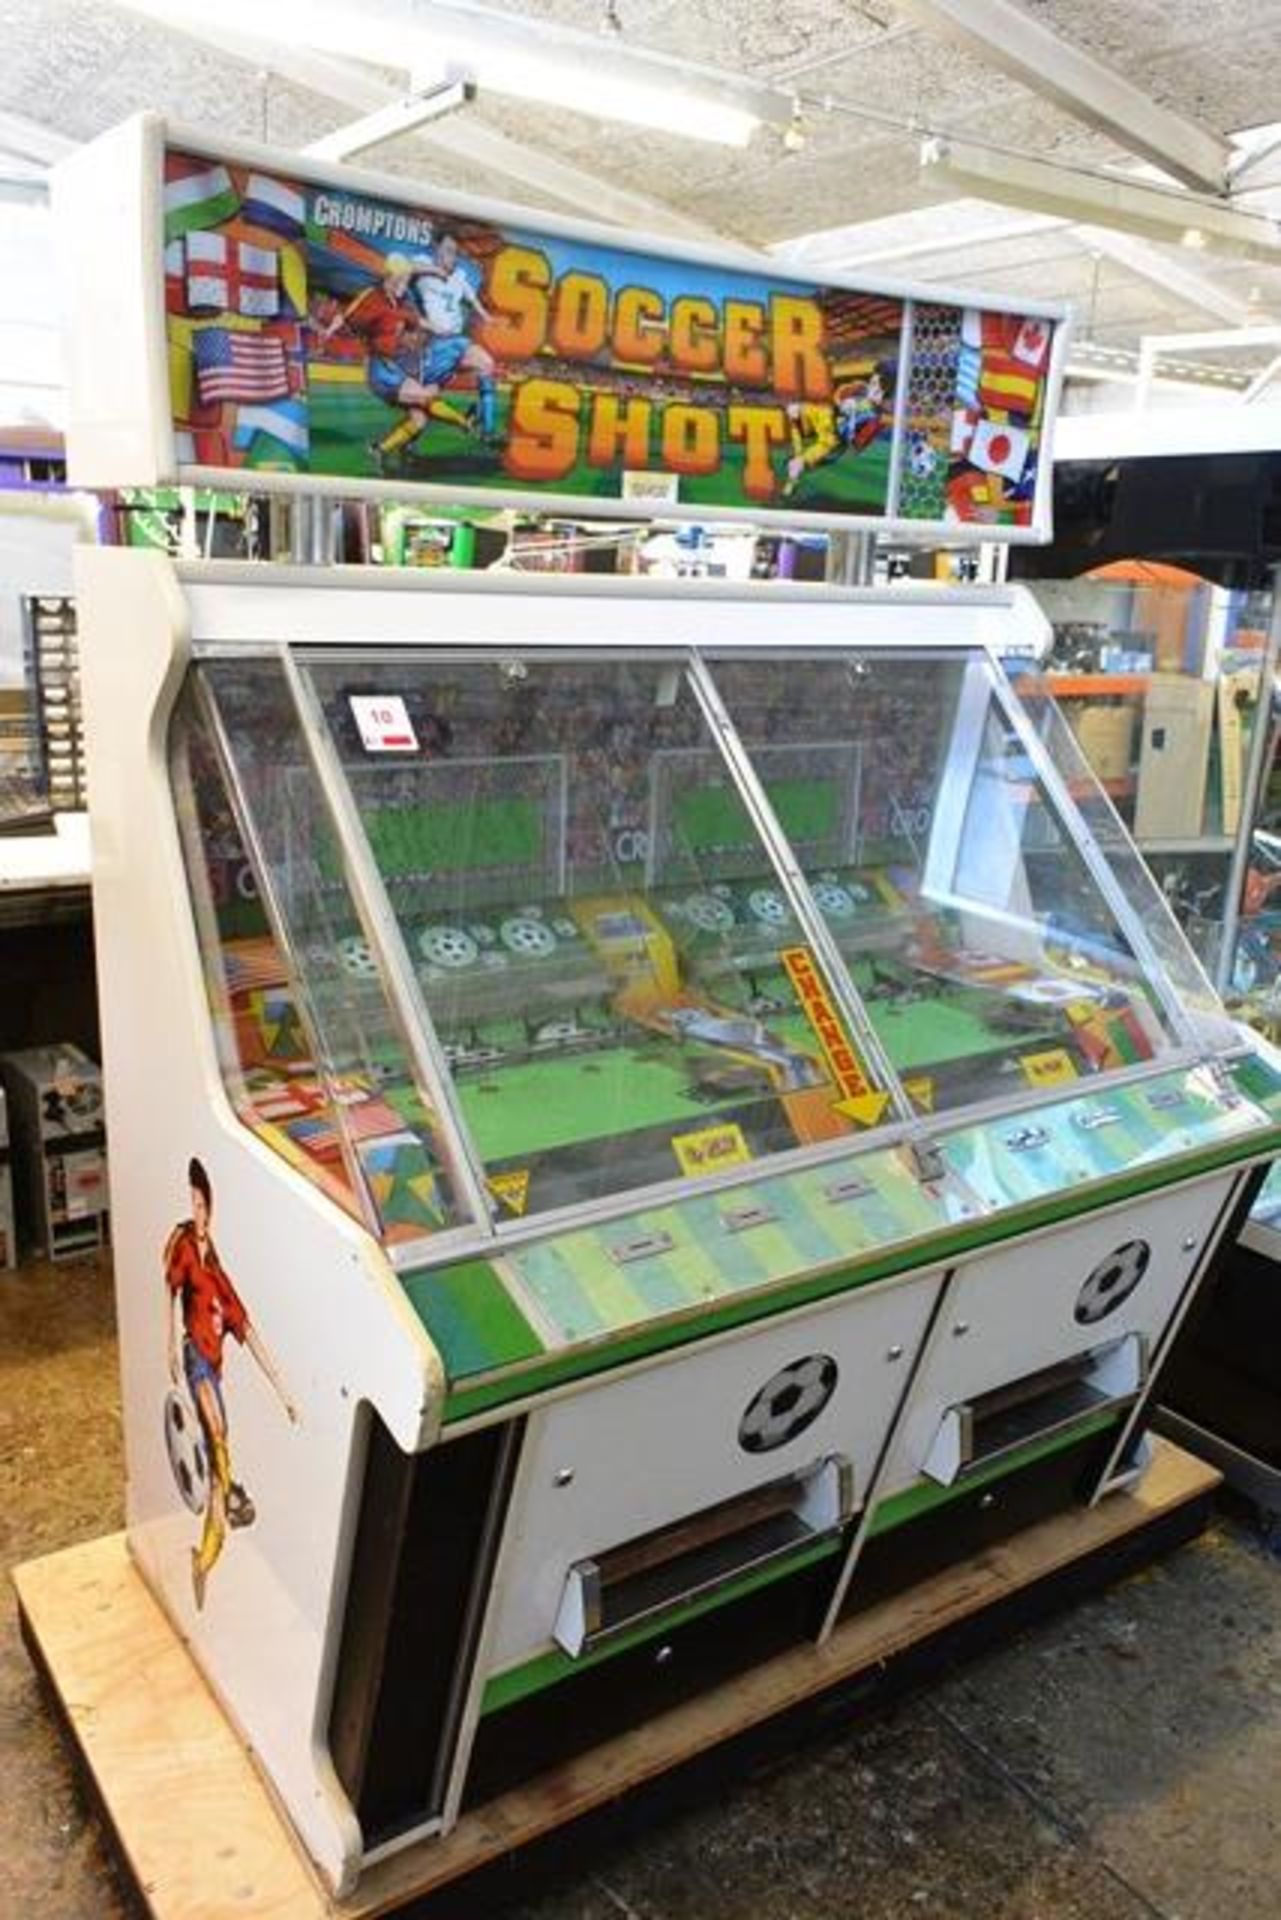 Cromptons Leisure Machines Ltd "Soccer Shot 2 Player with Changers" (1997), pay to play, serial